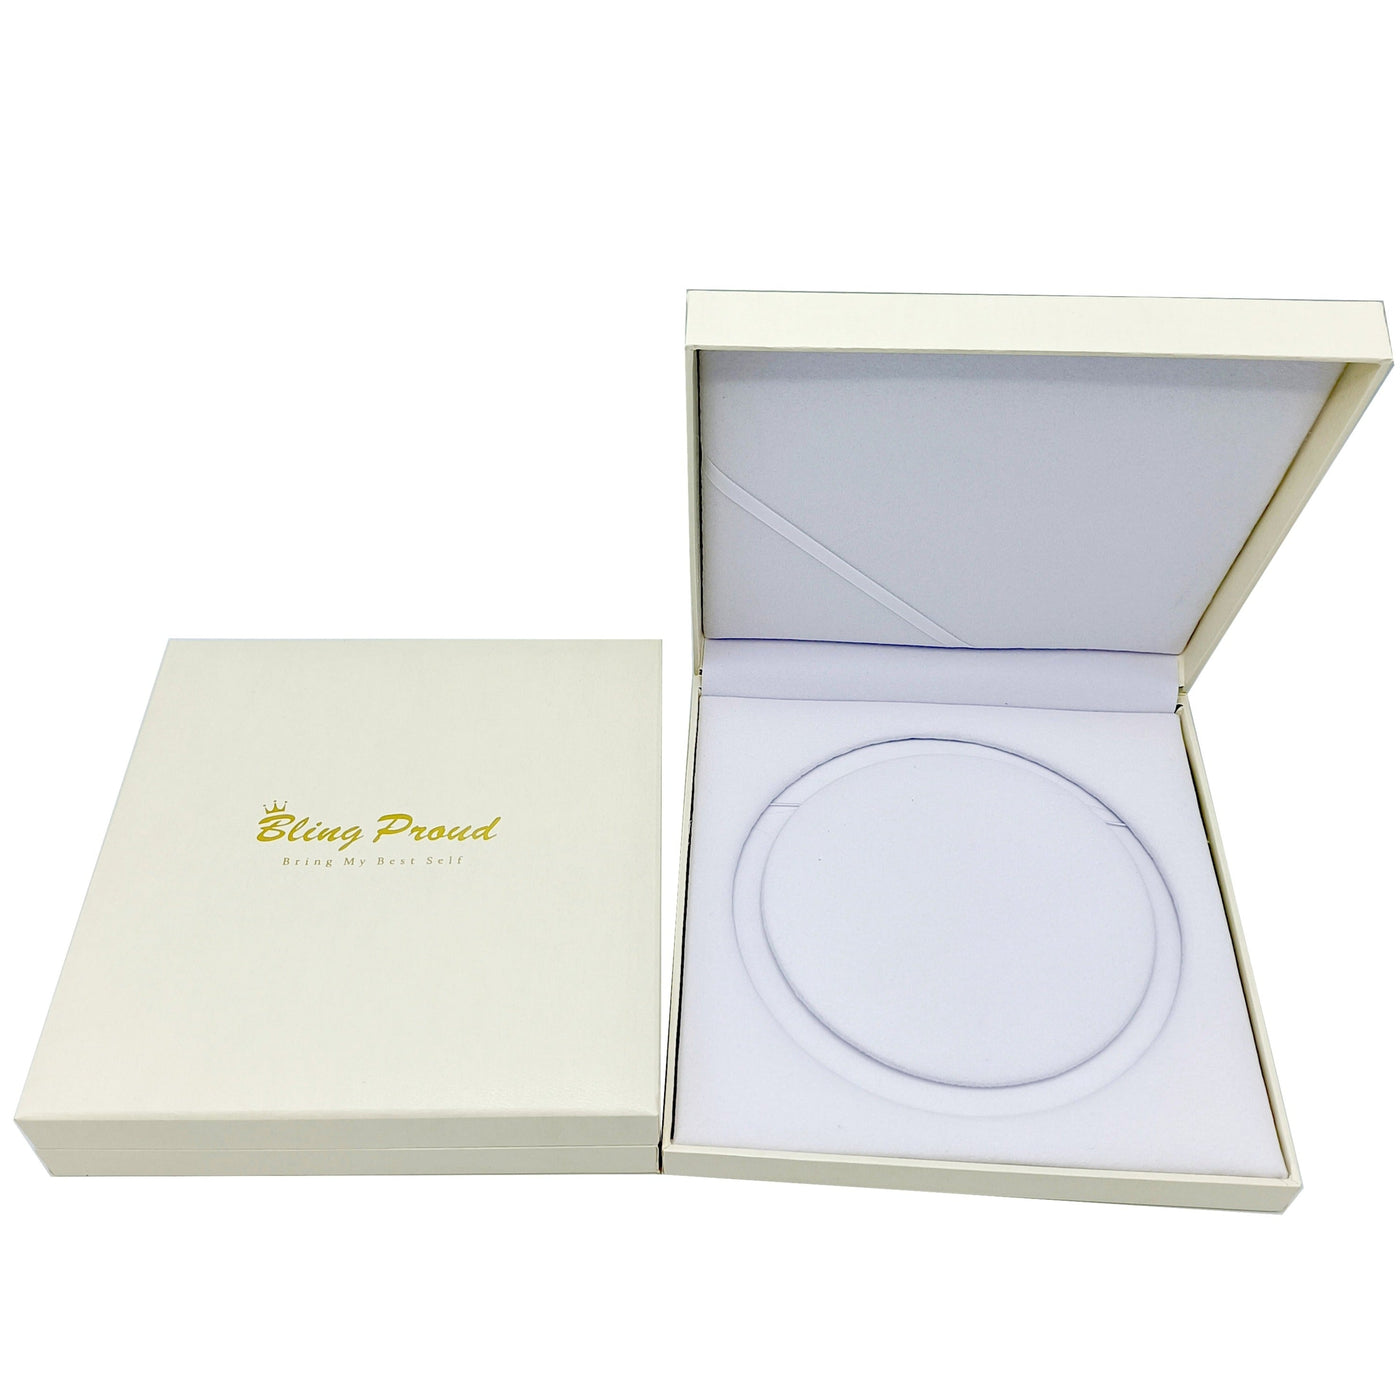 Bling Proud Deluxe Jewelry Box 